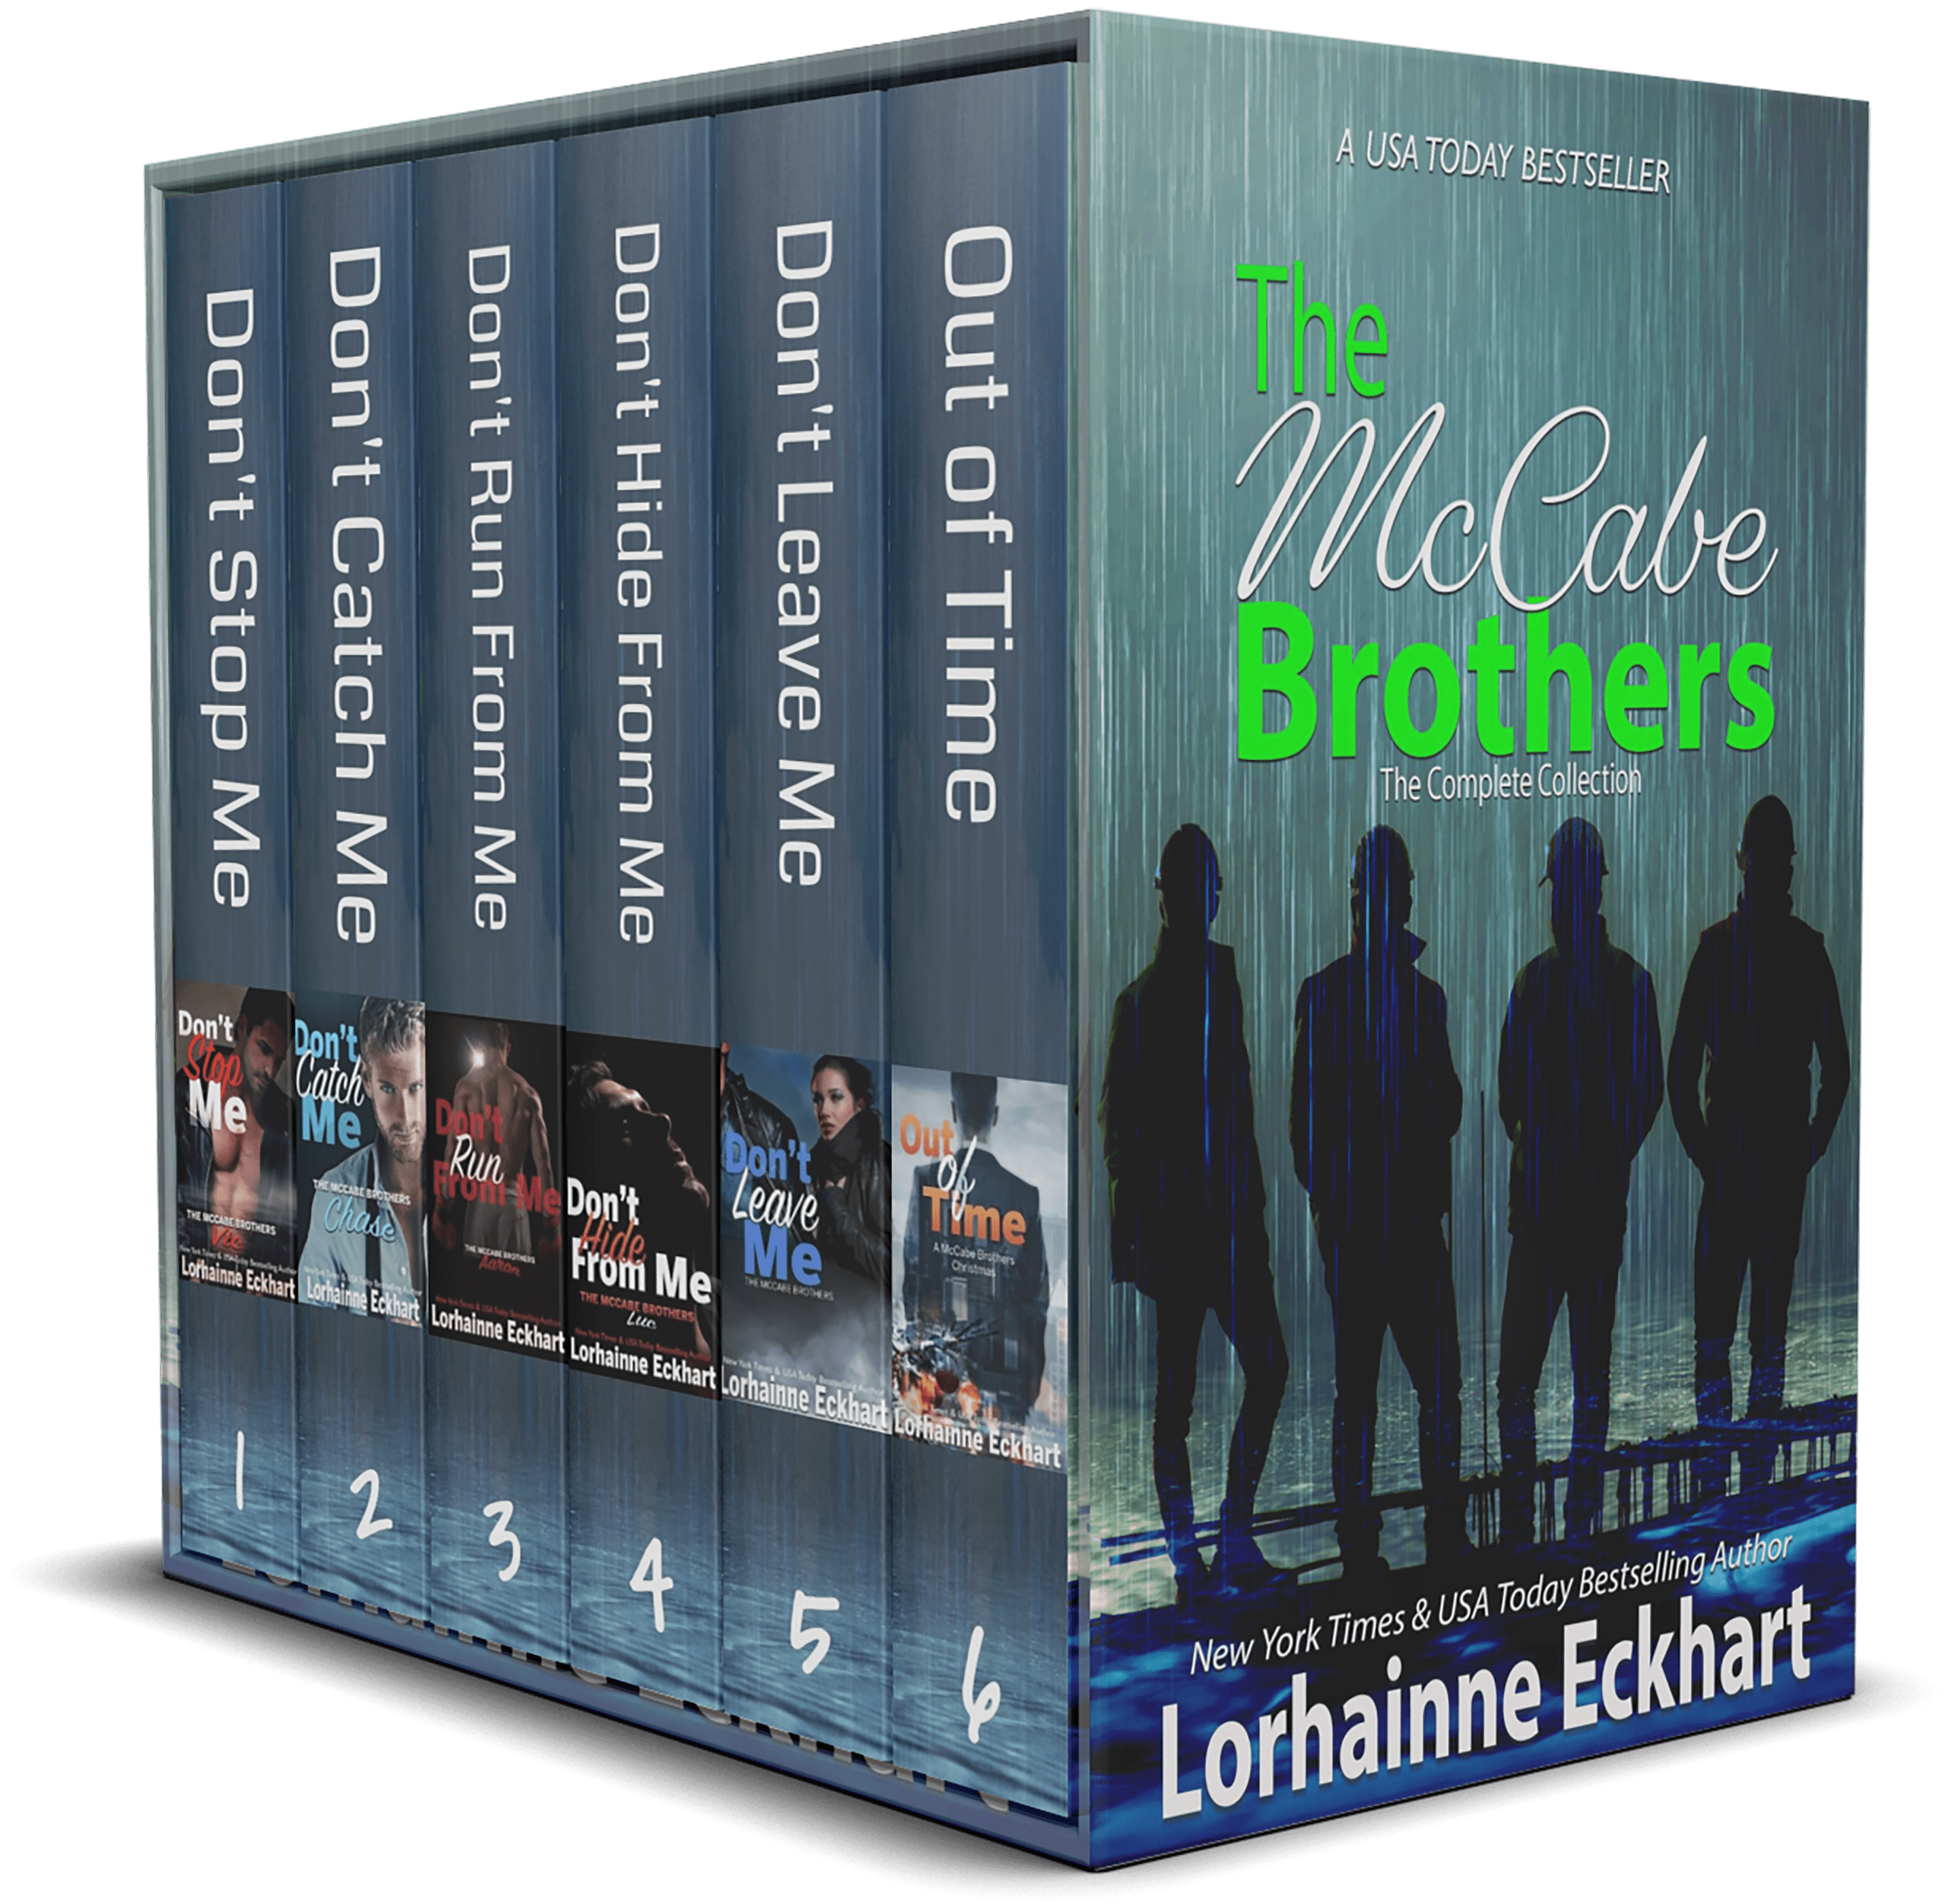 The McCabe Brothers: The Complete Collection